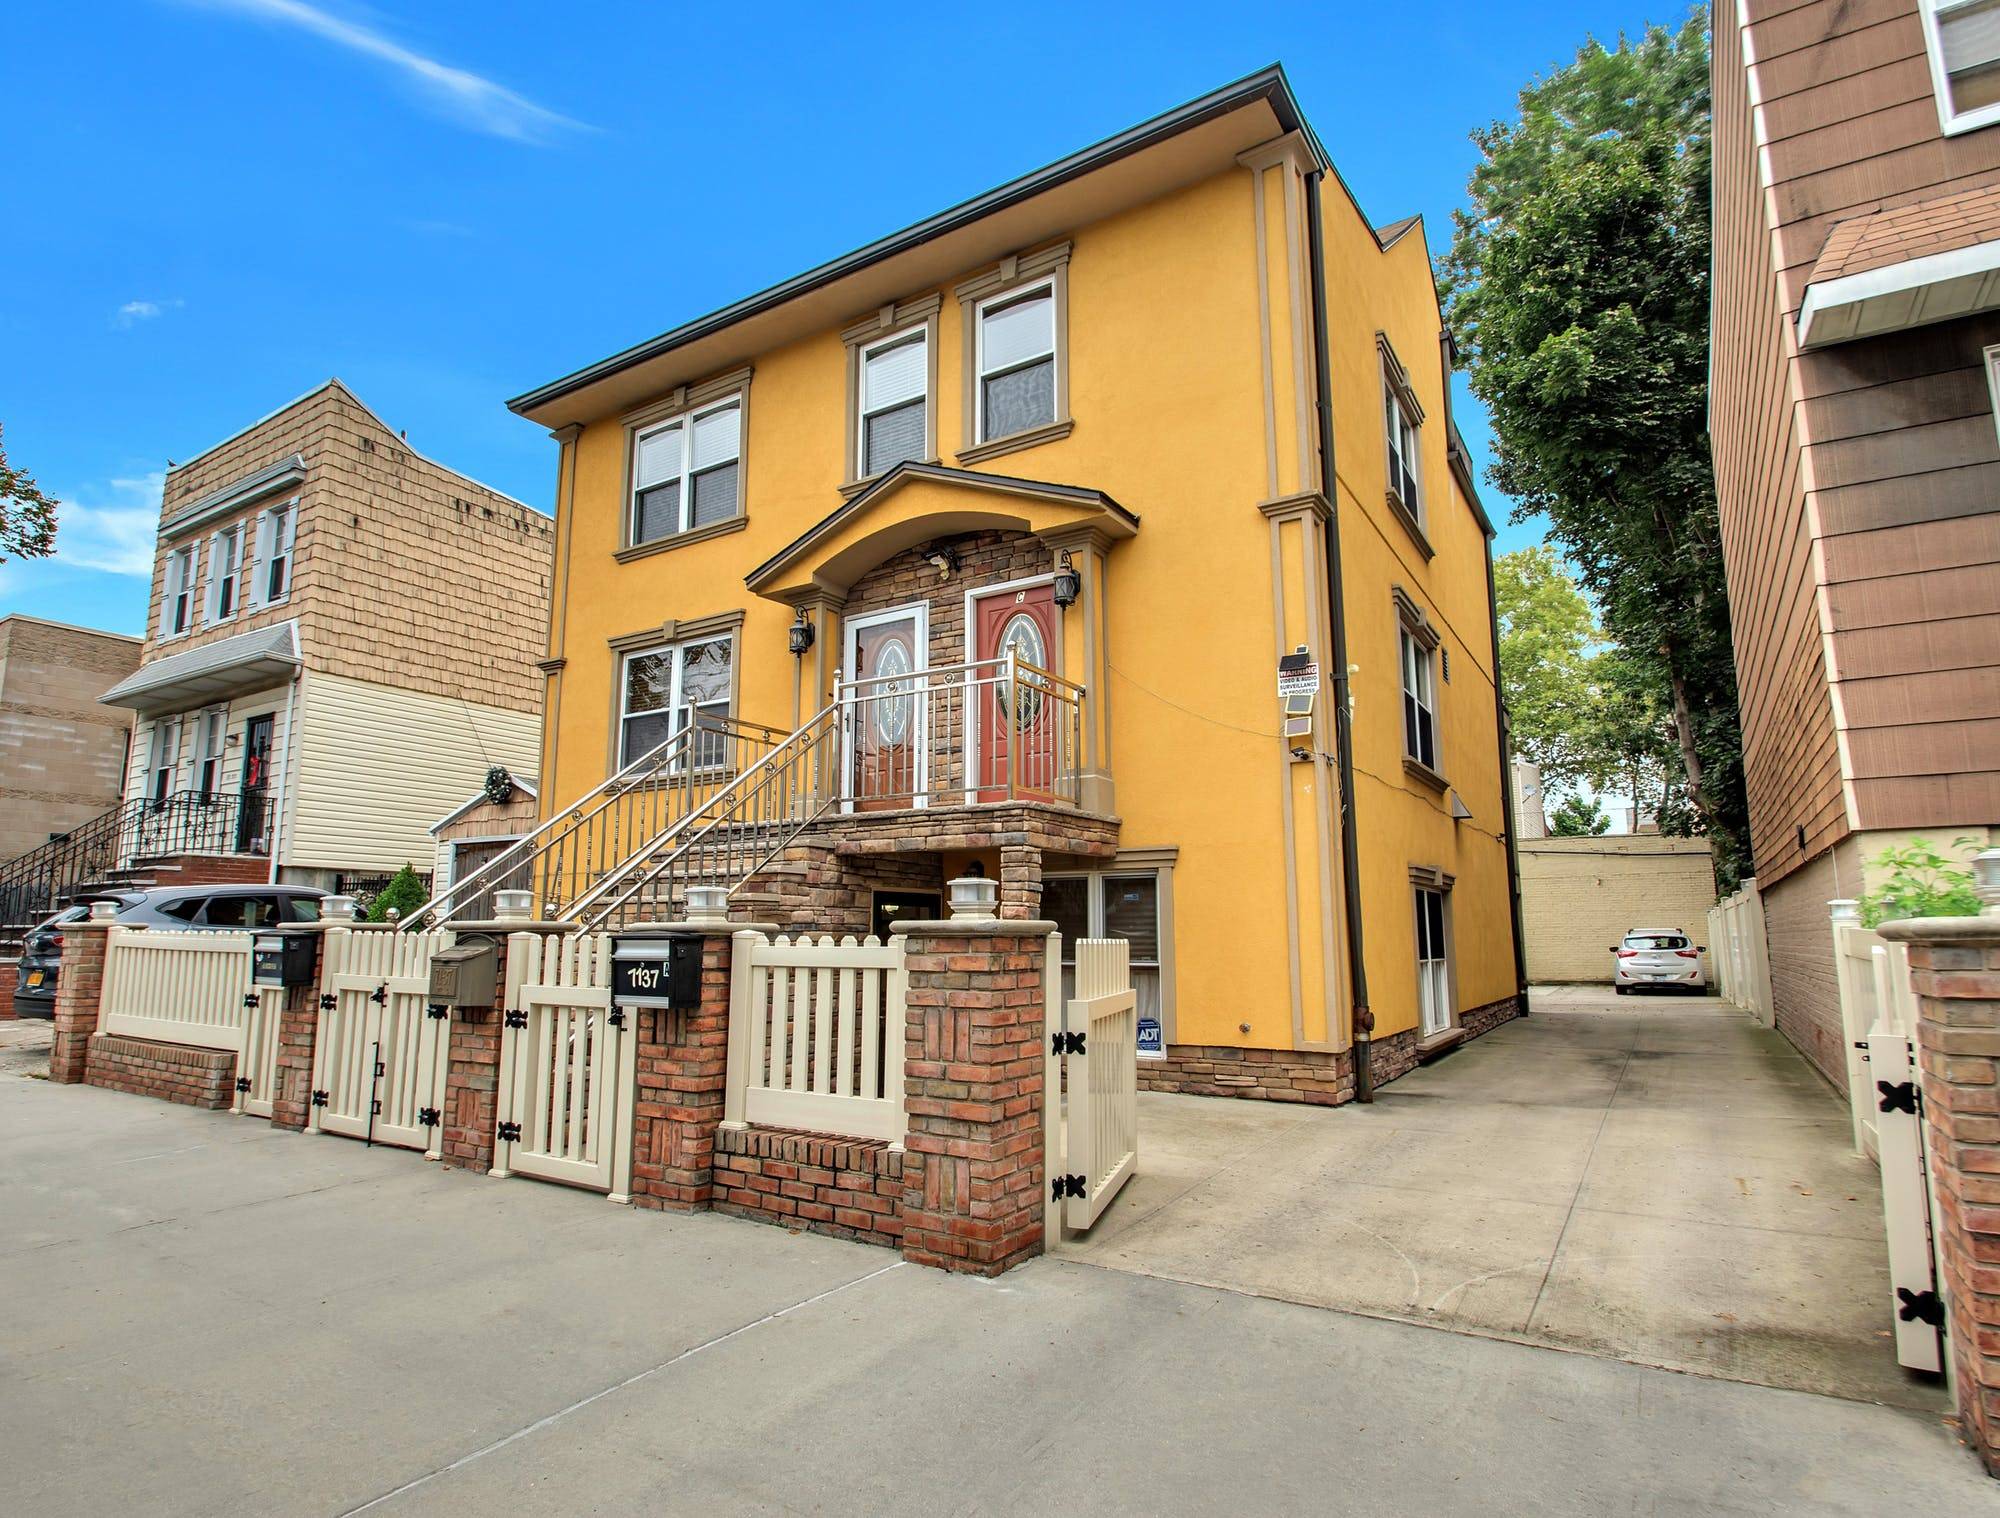 Duplex Condo Not a multifamily house Showings by appointment.